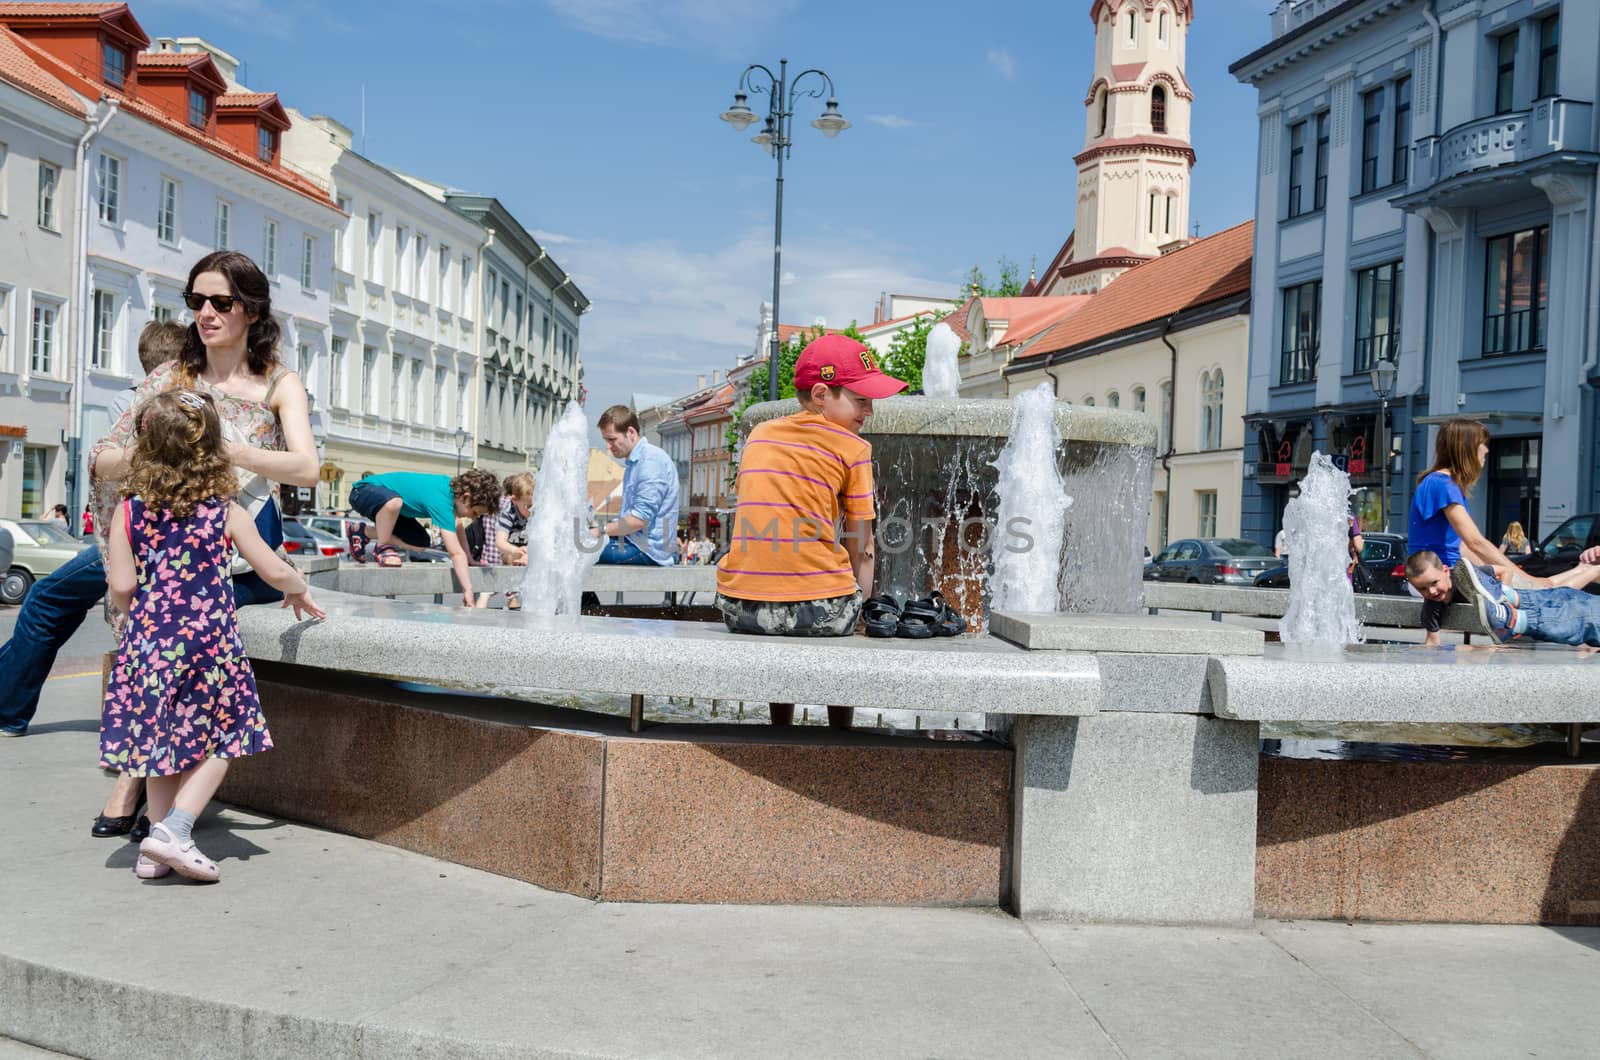 VILNIUS, LITHUANIA - MAY 18: children and mother leisure and recreation center of the fountain on hot spring day on May 18, 2013 in Vilnius.